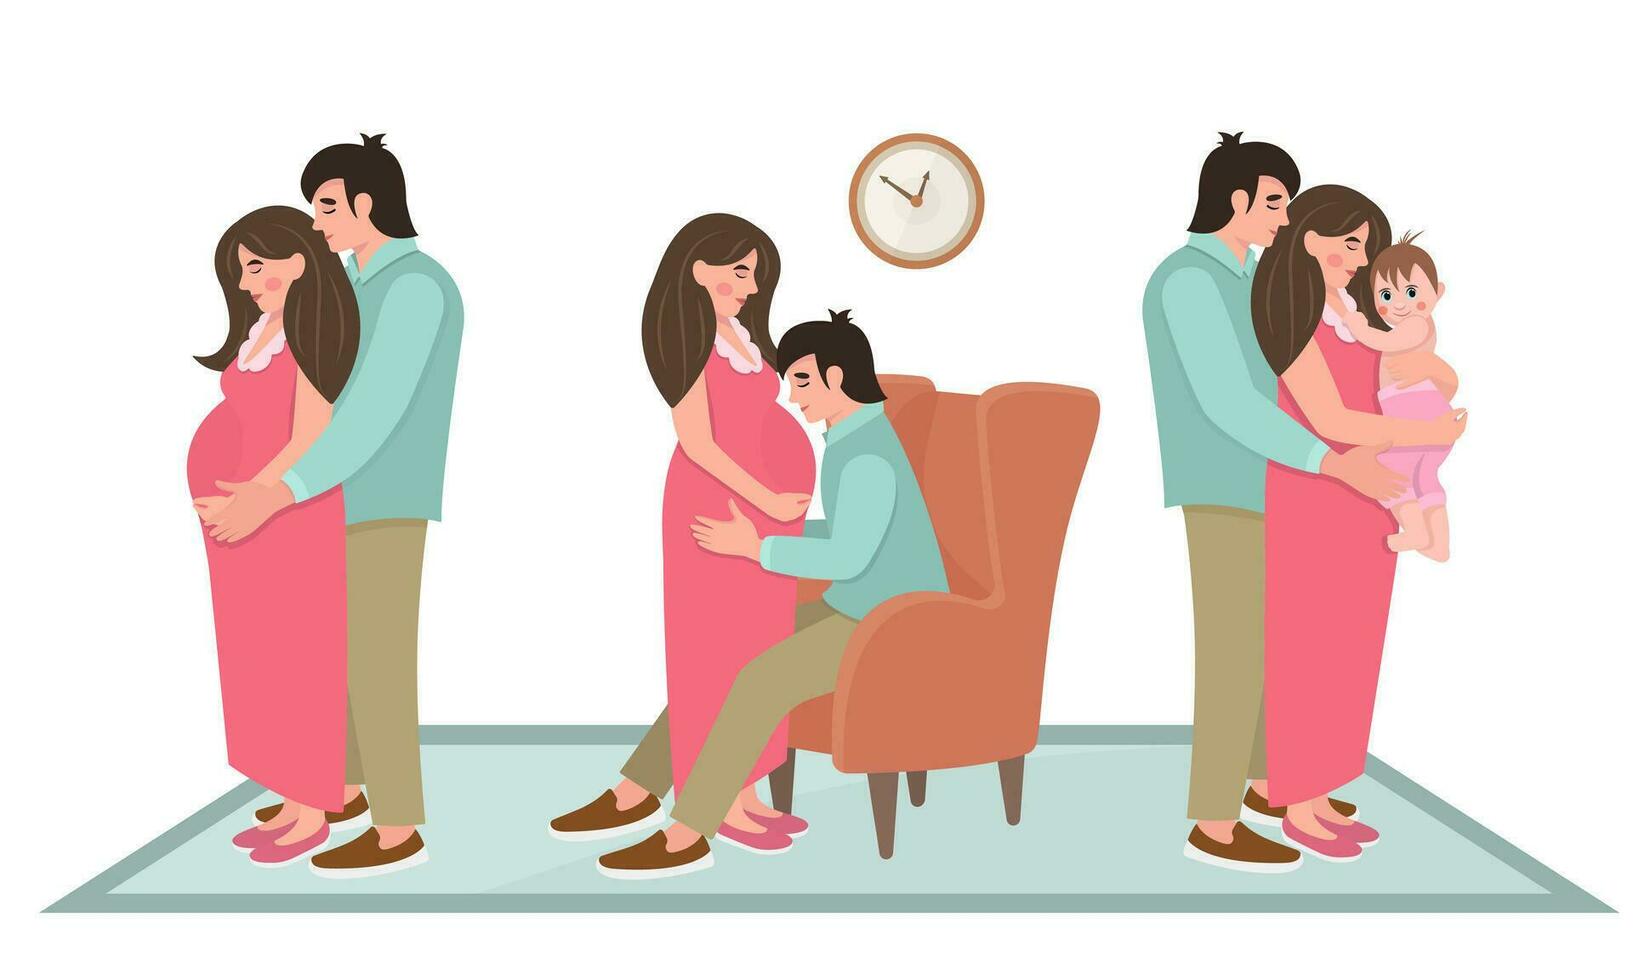 Flat illustration about pregnancy and childbirth. Young pregnant woman with her husband. A man kisses and hugs his wife. Pregnancy and newborn. Dad and mom with a child. Healthy happy pregnancy. vector